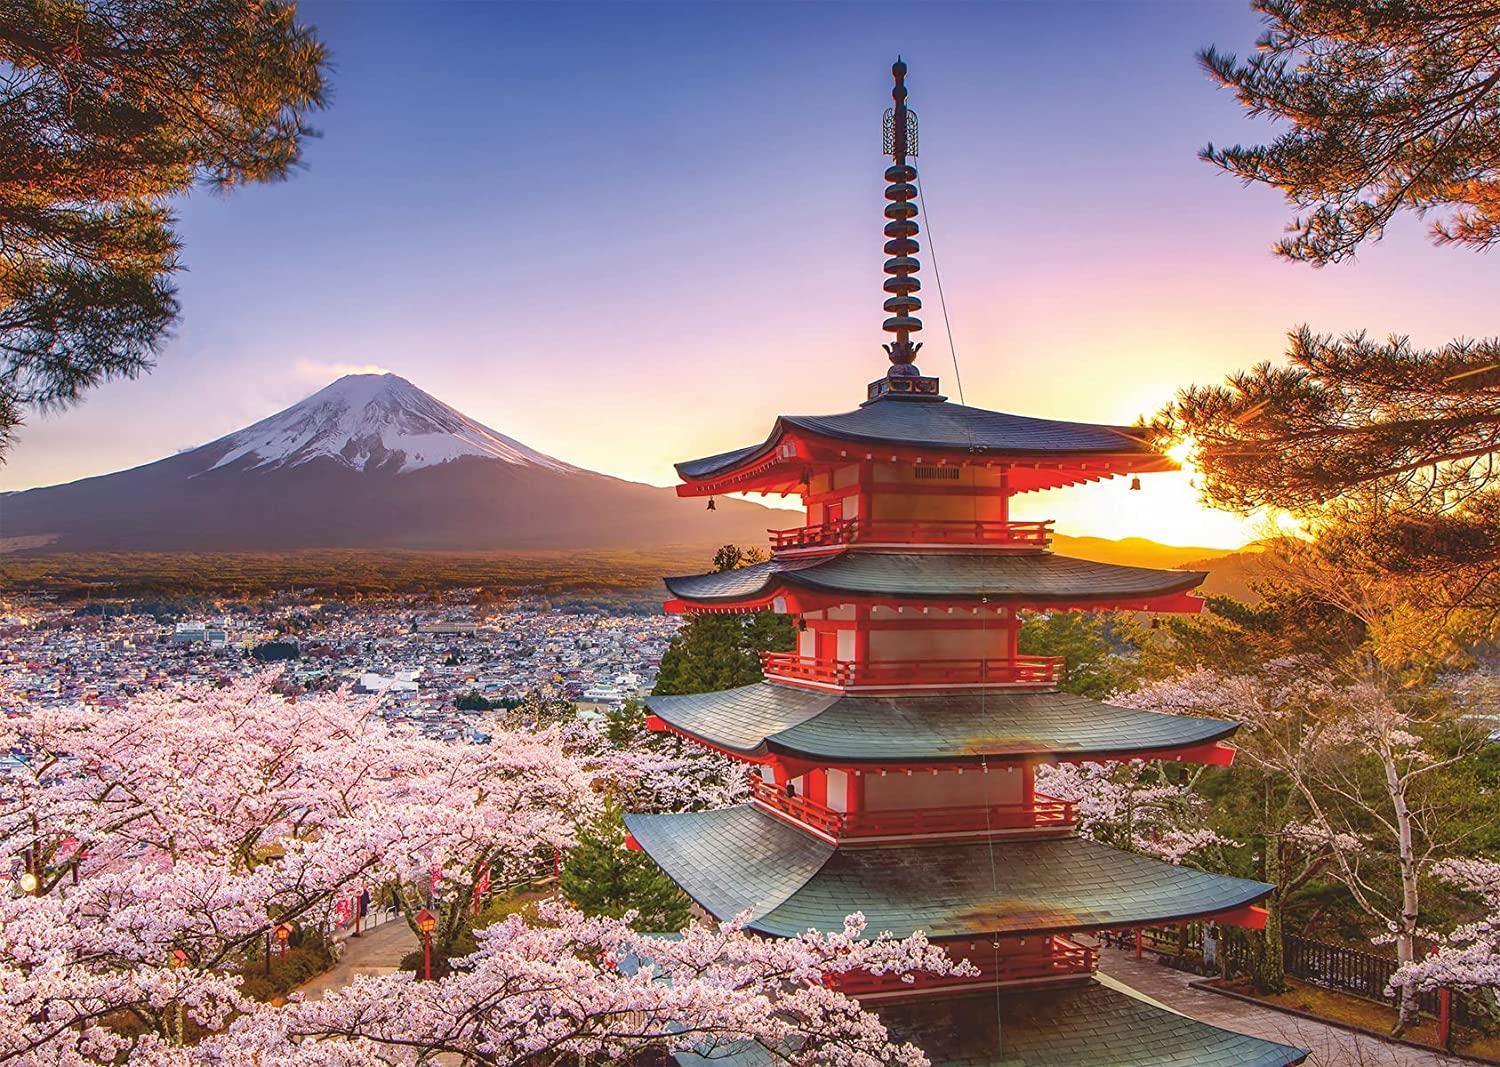 Ravensburger Mount Fuji Cherry Blossom View Jigsaw Puzzle (1000 Pieces)